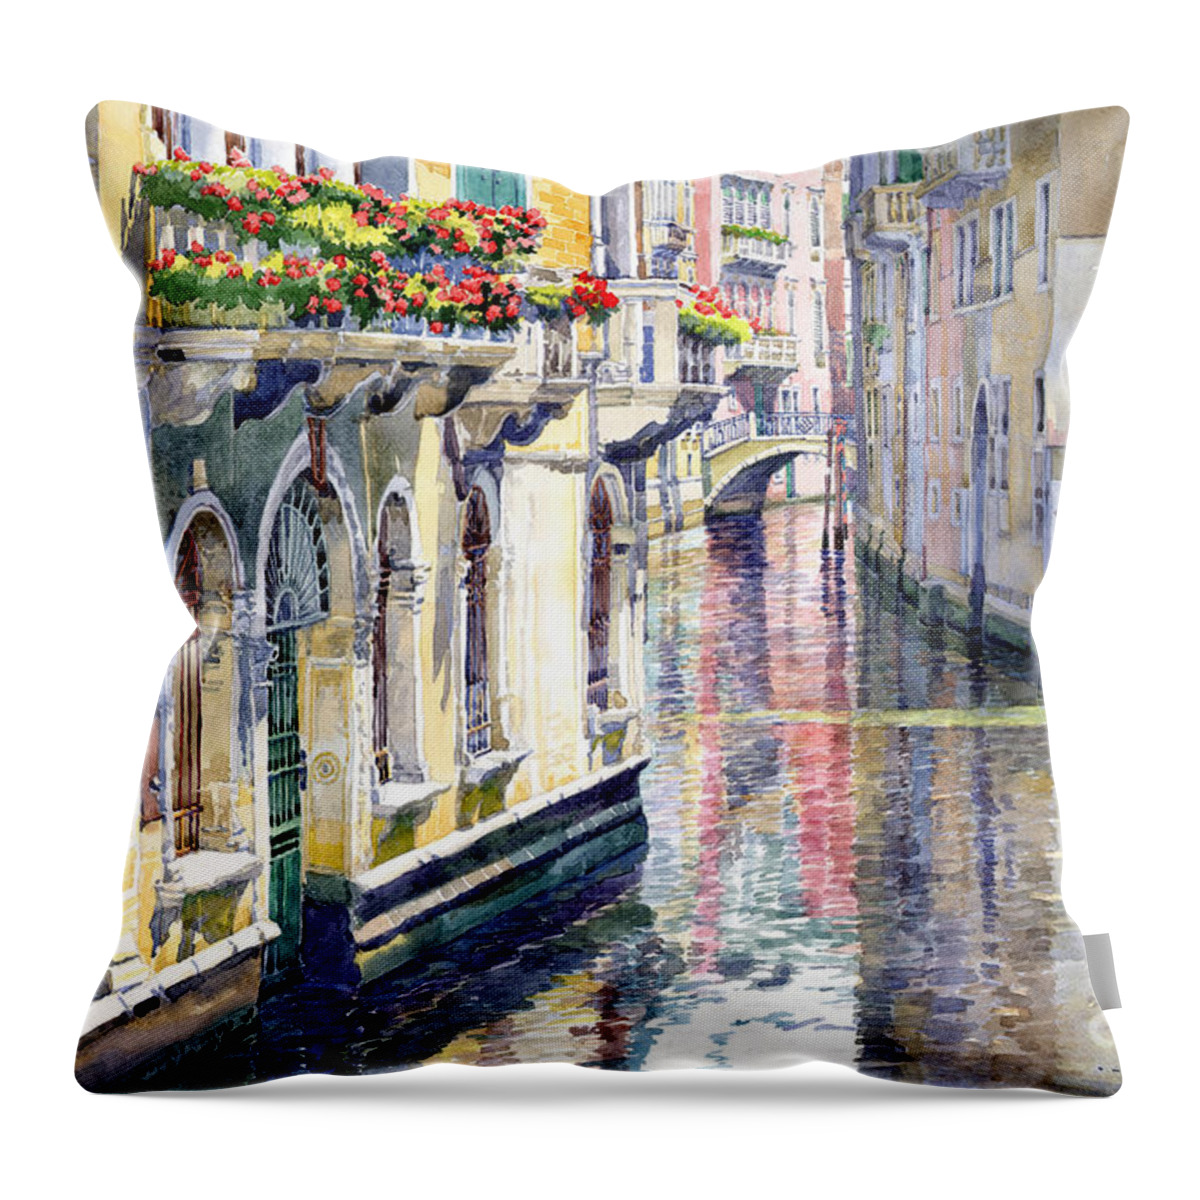 Shevchukart Throw Pillow featuring the painting Italy Venice Midday by Yuriy Shevchuk